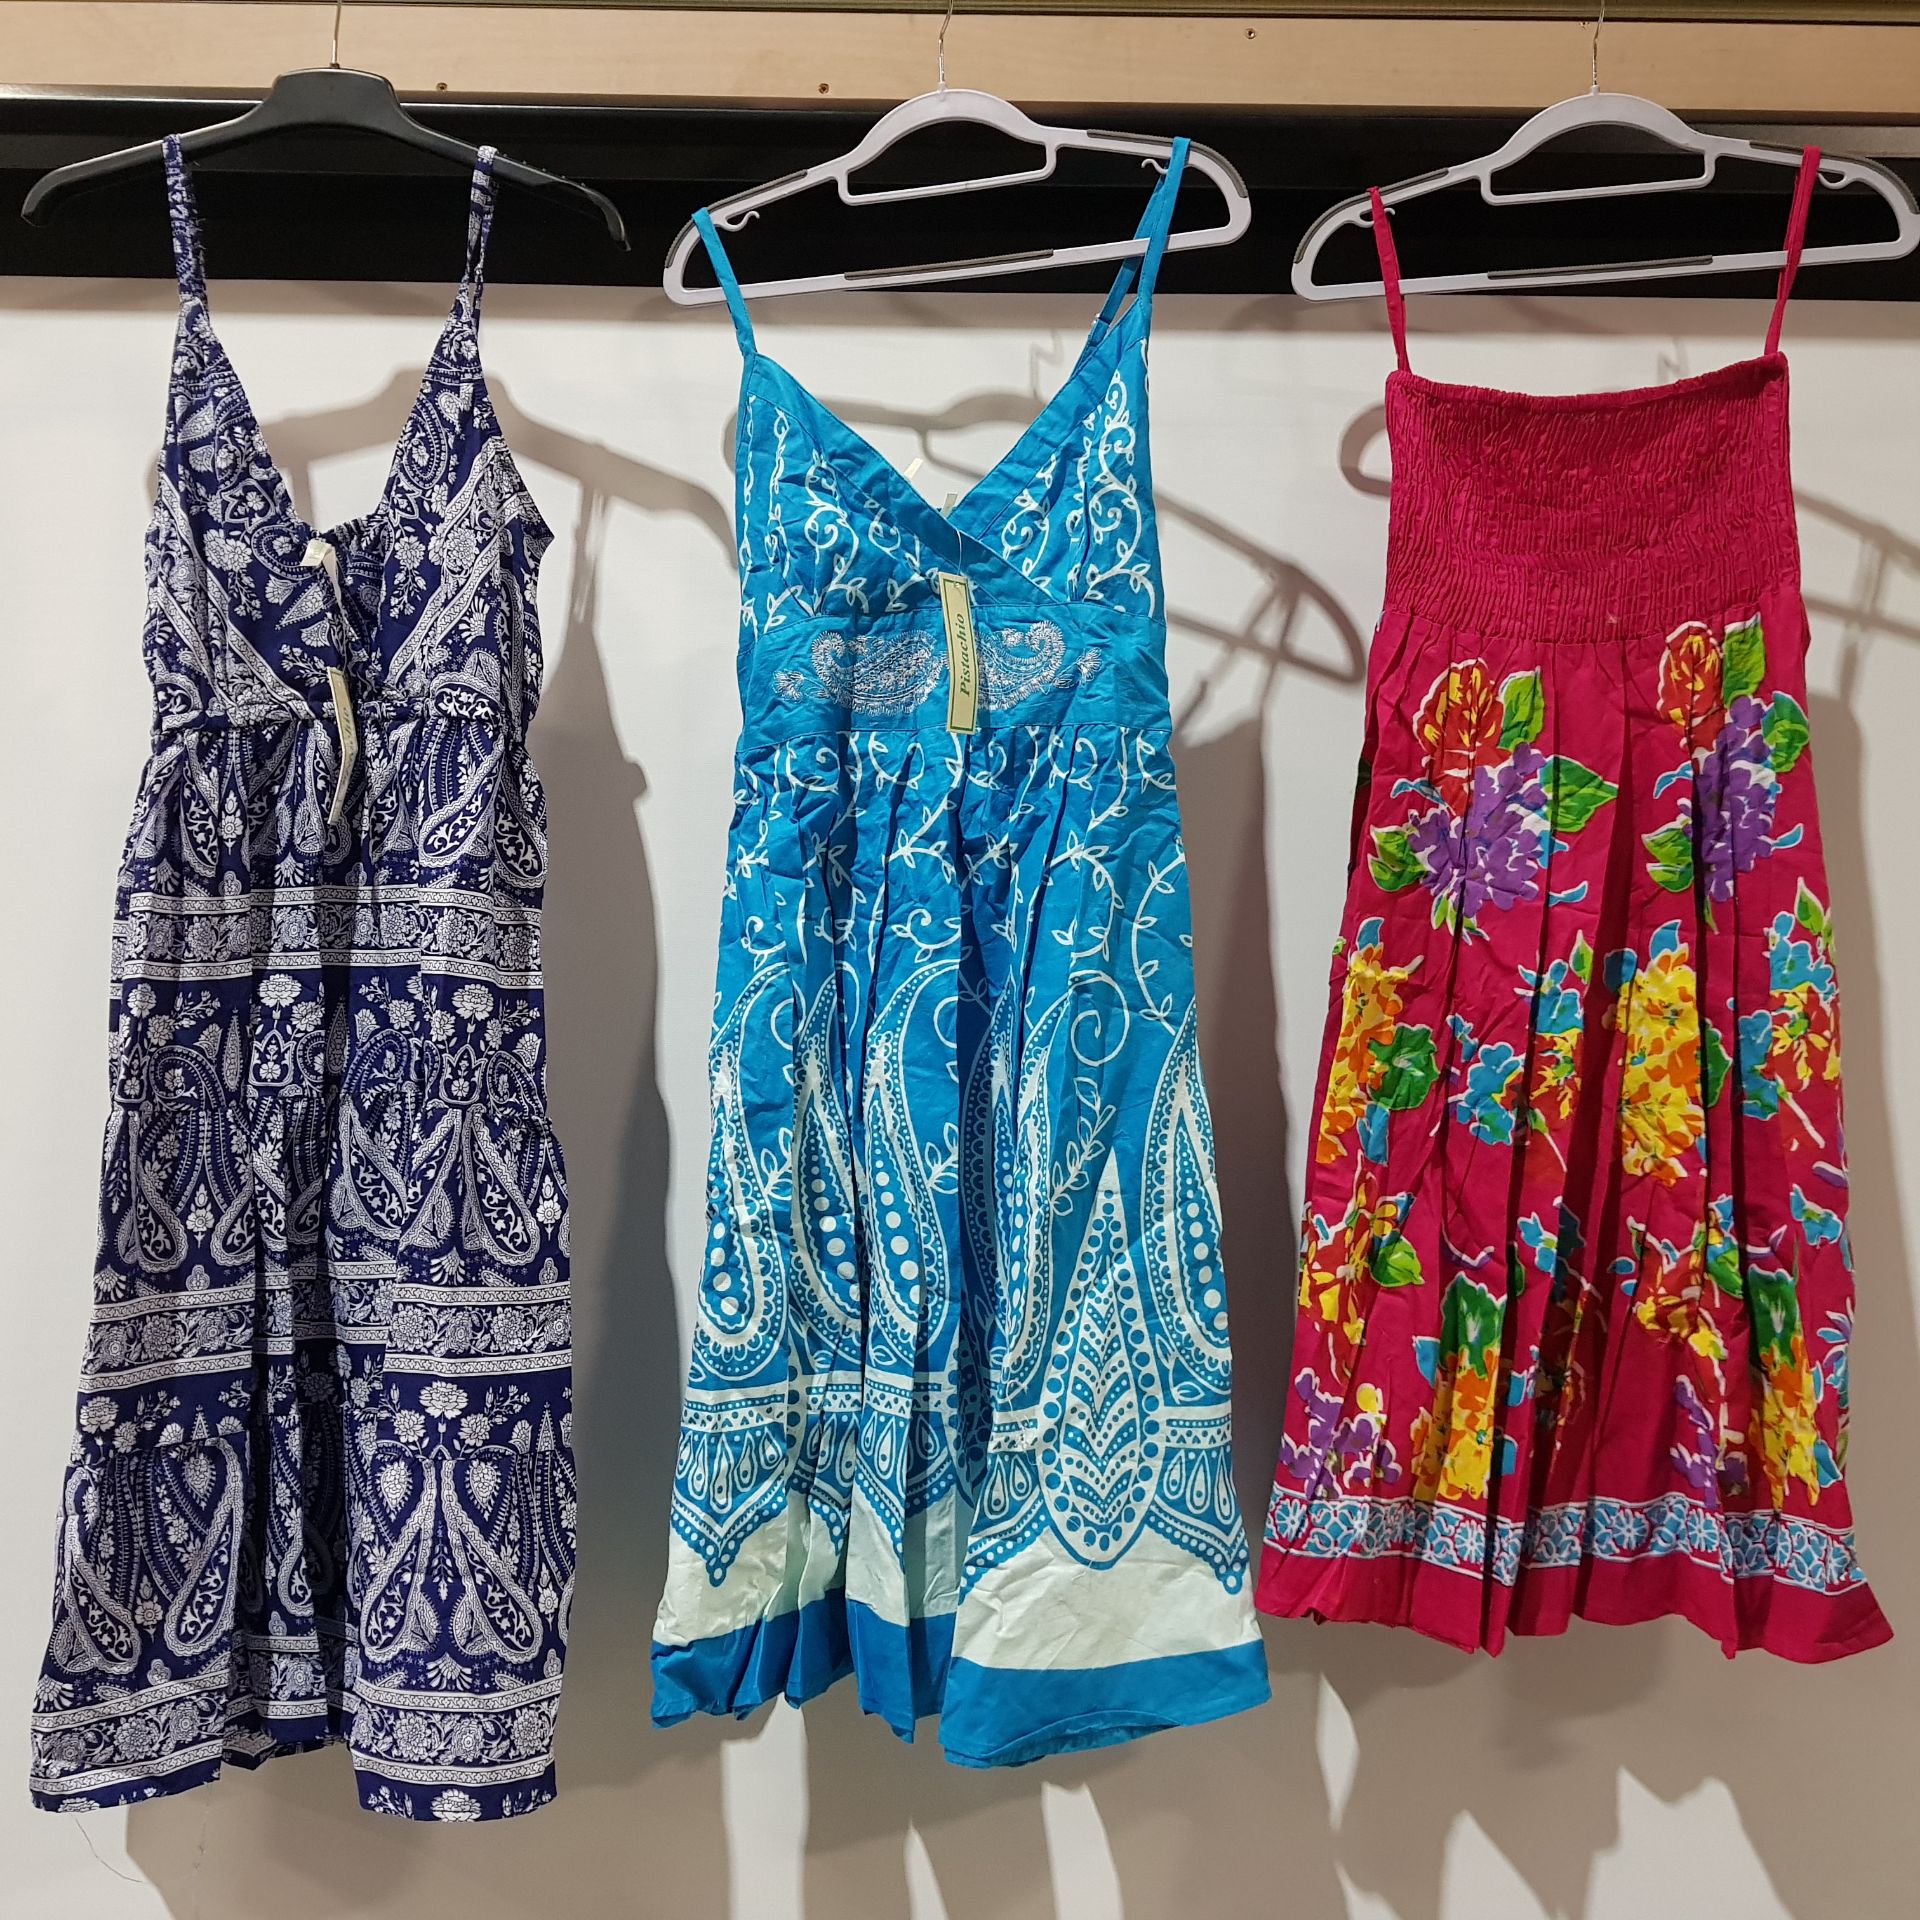 24 X BRAND NEW MIXED STYLES AND SIZES PISTACHIO SUMMER DRESSES- RRP £25 EACH- TOTAL £600-IN TWO